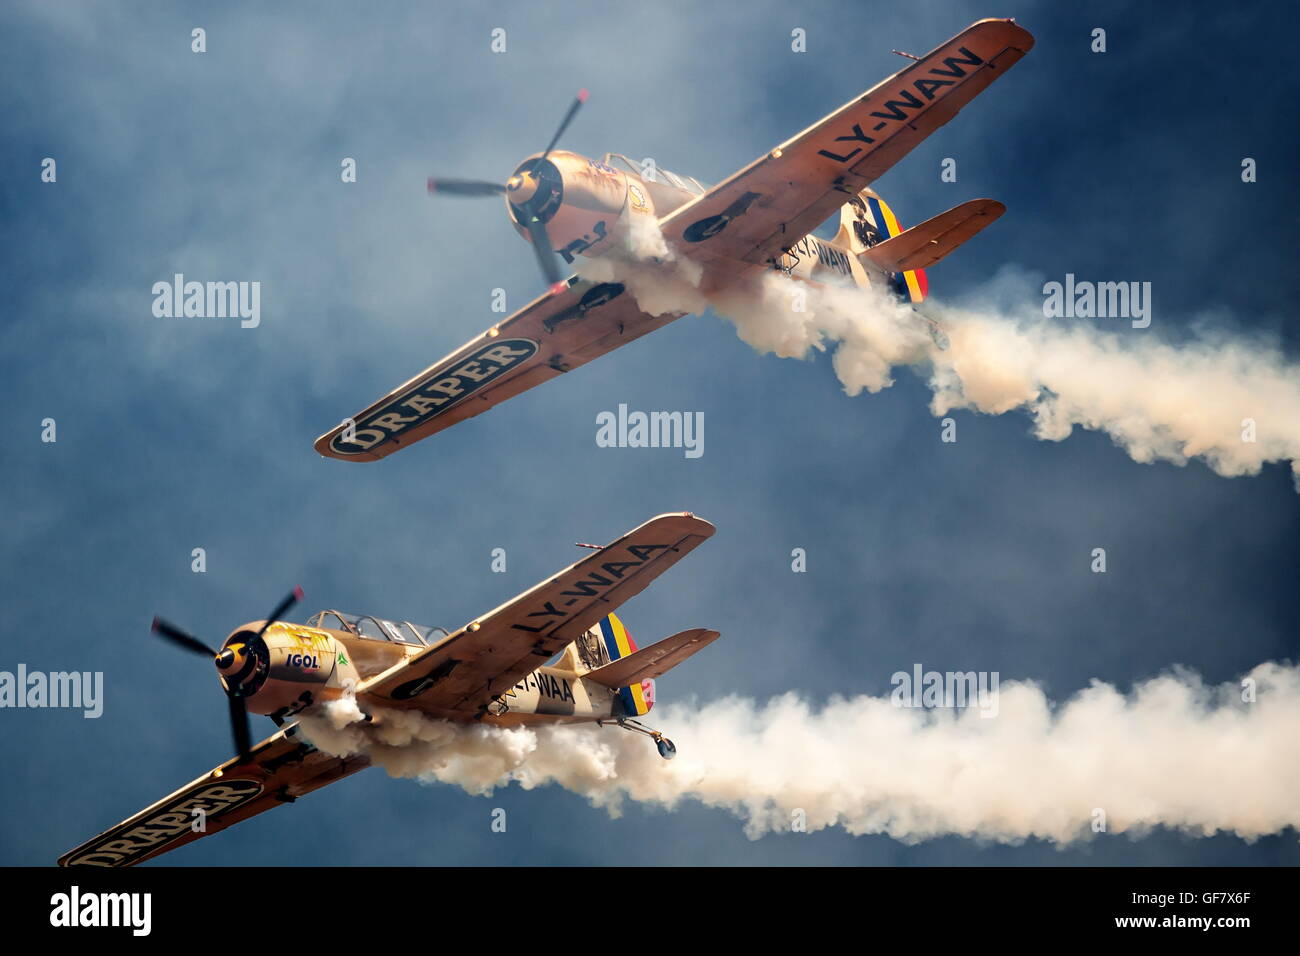 ROMANIA - JULY 23 Two unidentified vintage monoplane aircraft flying in formation at an air show on July 23, 2016 Campia Turzii Stock Photo